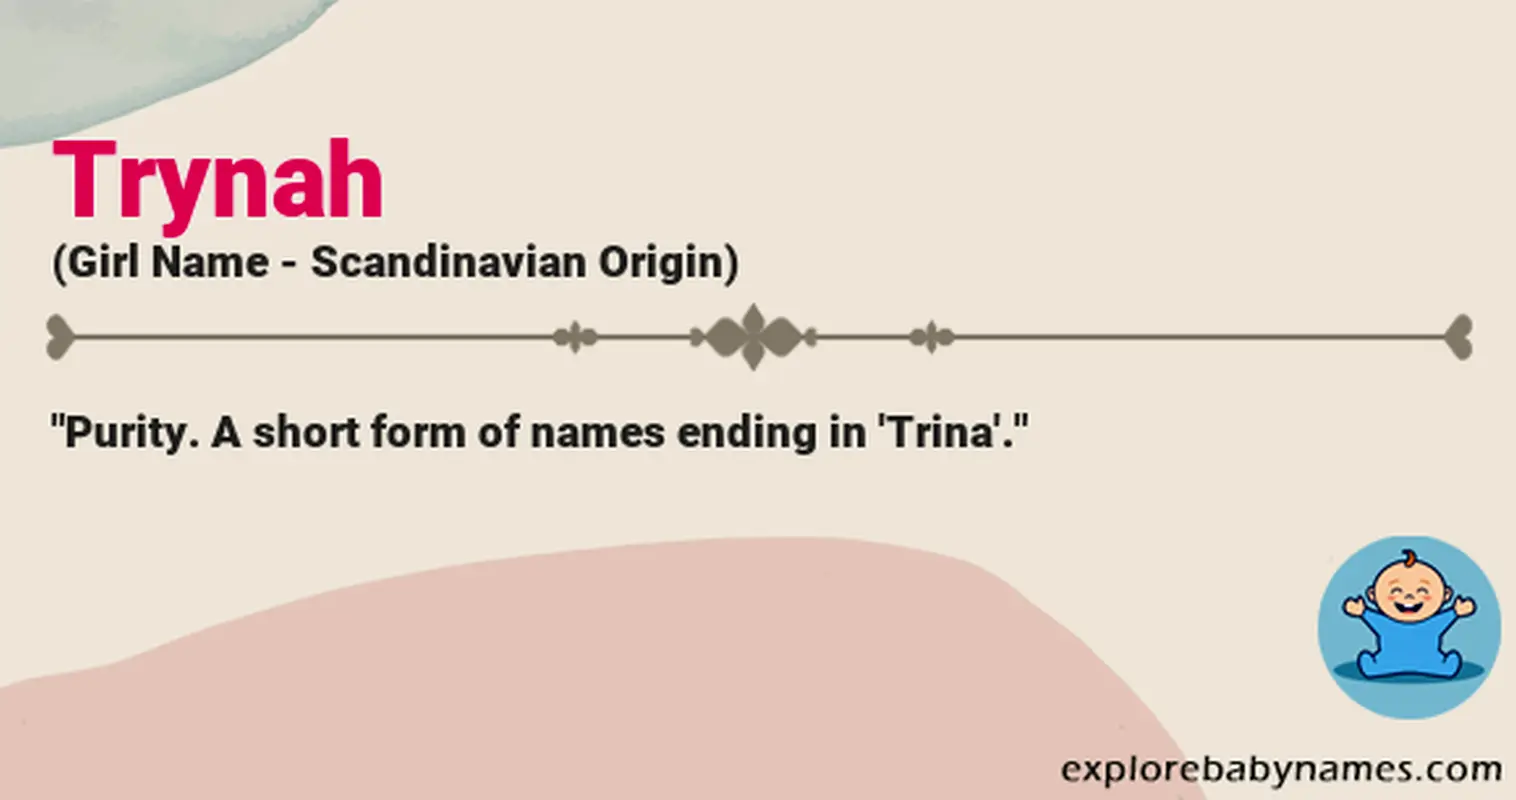 Meaning of Trynah